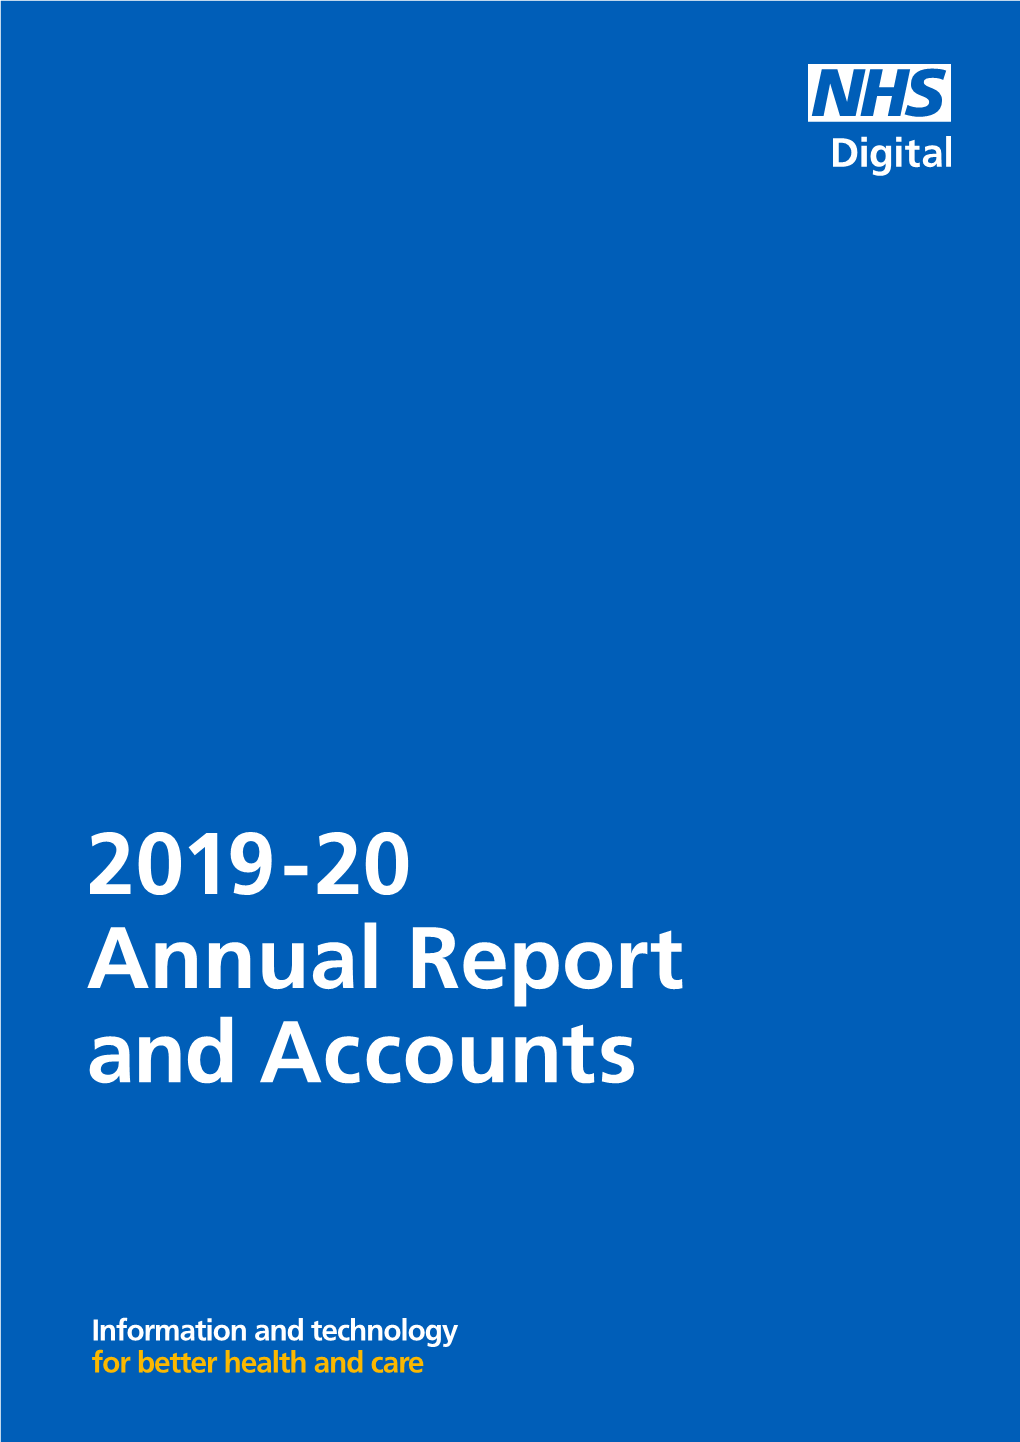 NHS Digital Annual Report and Accounts 2019-20 Our Experiences Over the Past the Fight Continues